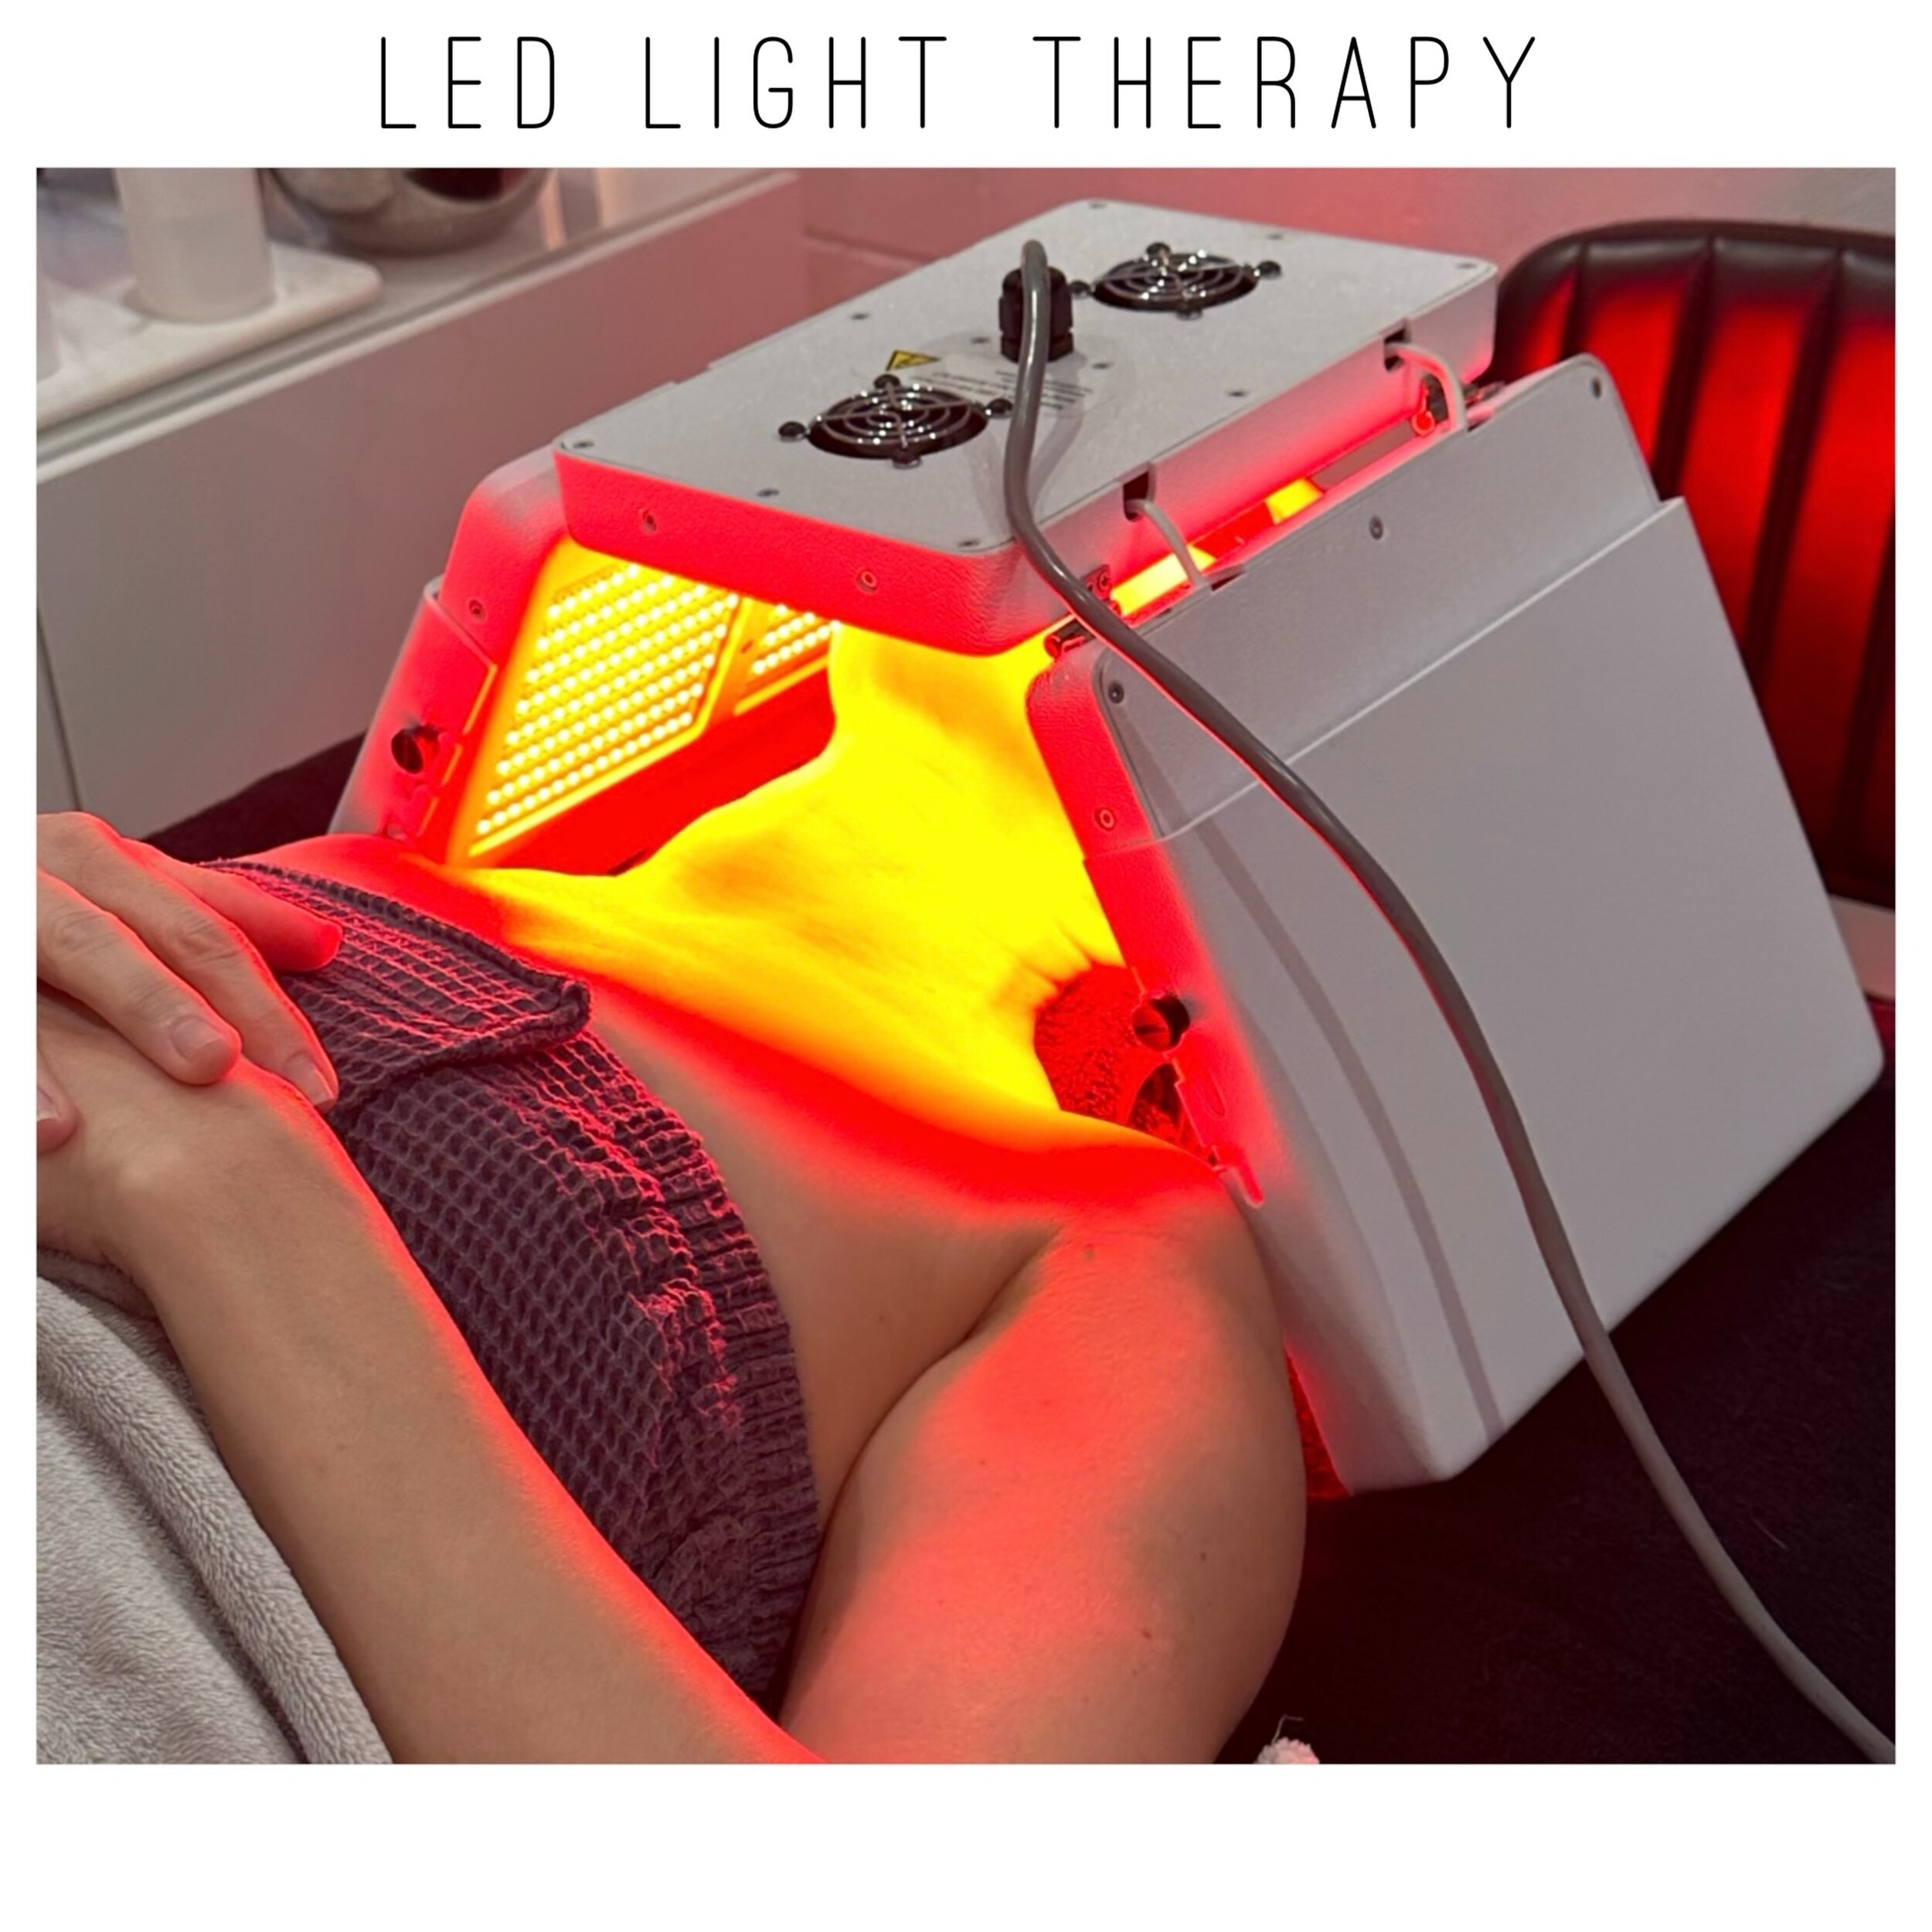 LED light therapy is changing the beauty game and quickly becoming a favorite of estheticians and clients alike. 

Light therapy uses natural light of different colors (wavelengths) to cure, treat, and prevent a growing list of conditions. The light 